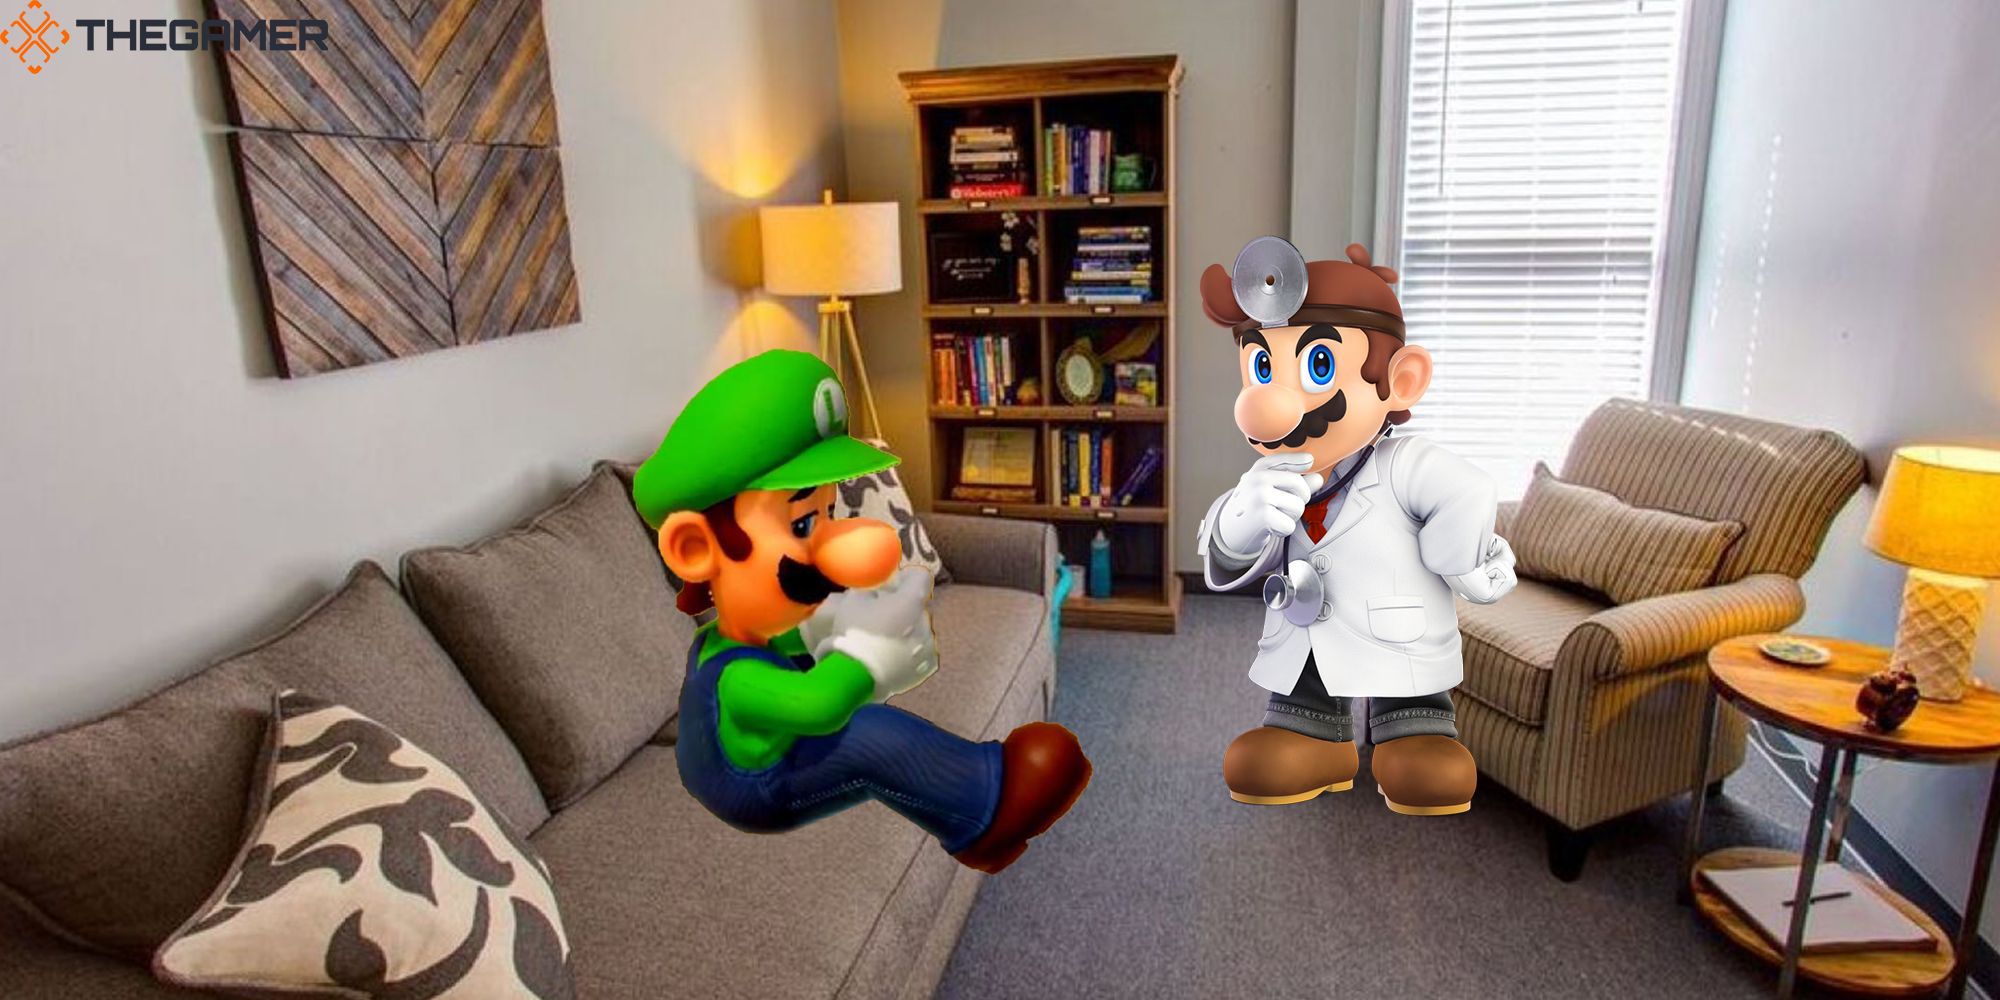 Dr. Mario consults a depressed Luigi in his office during a therapy session.